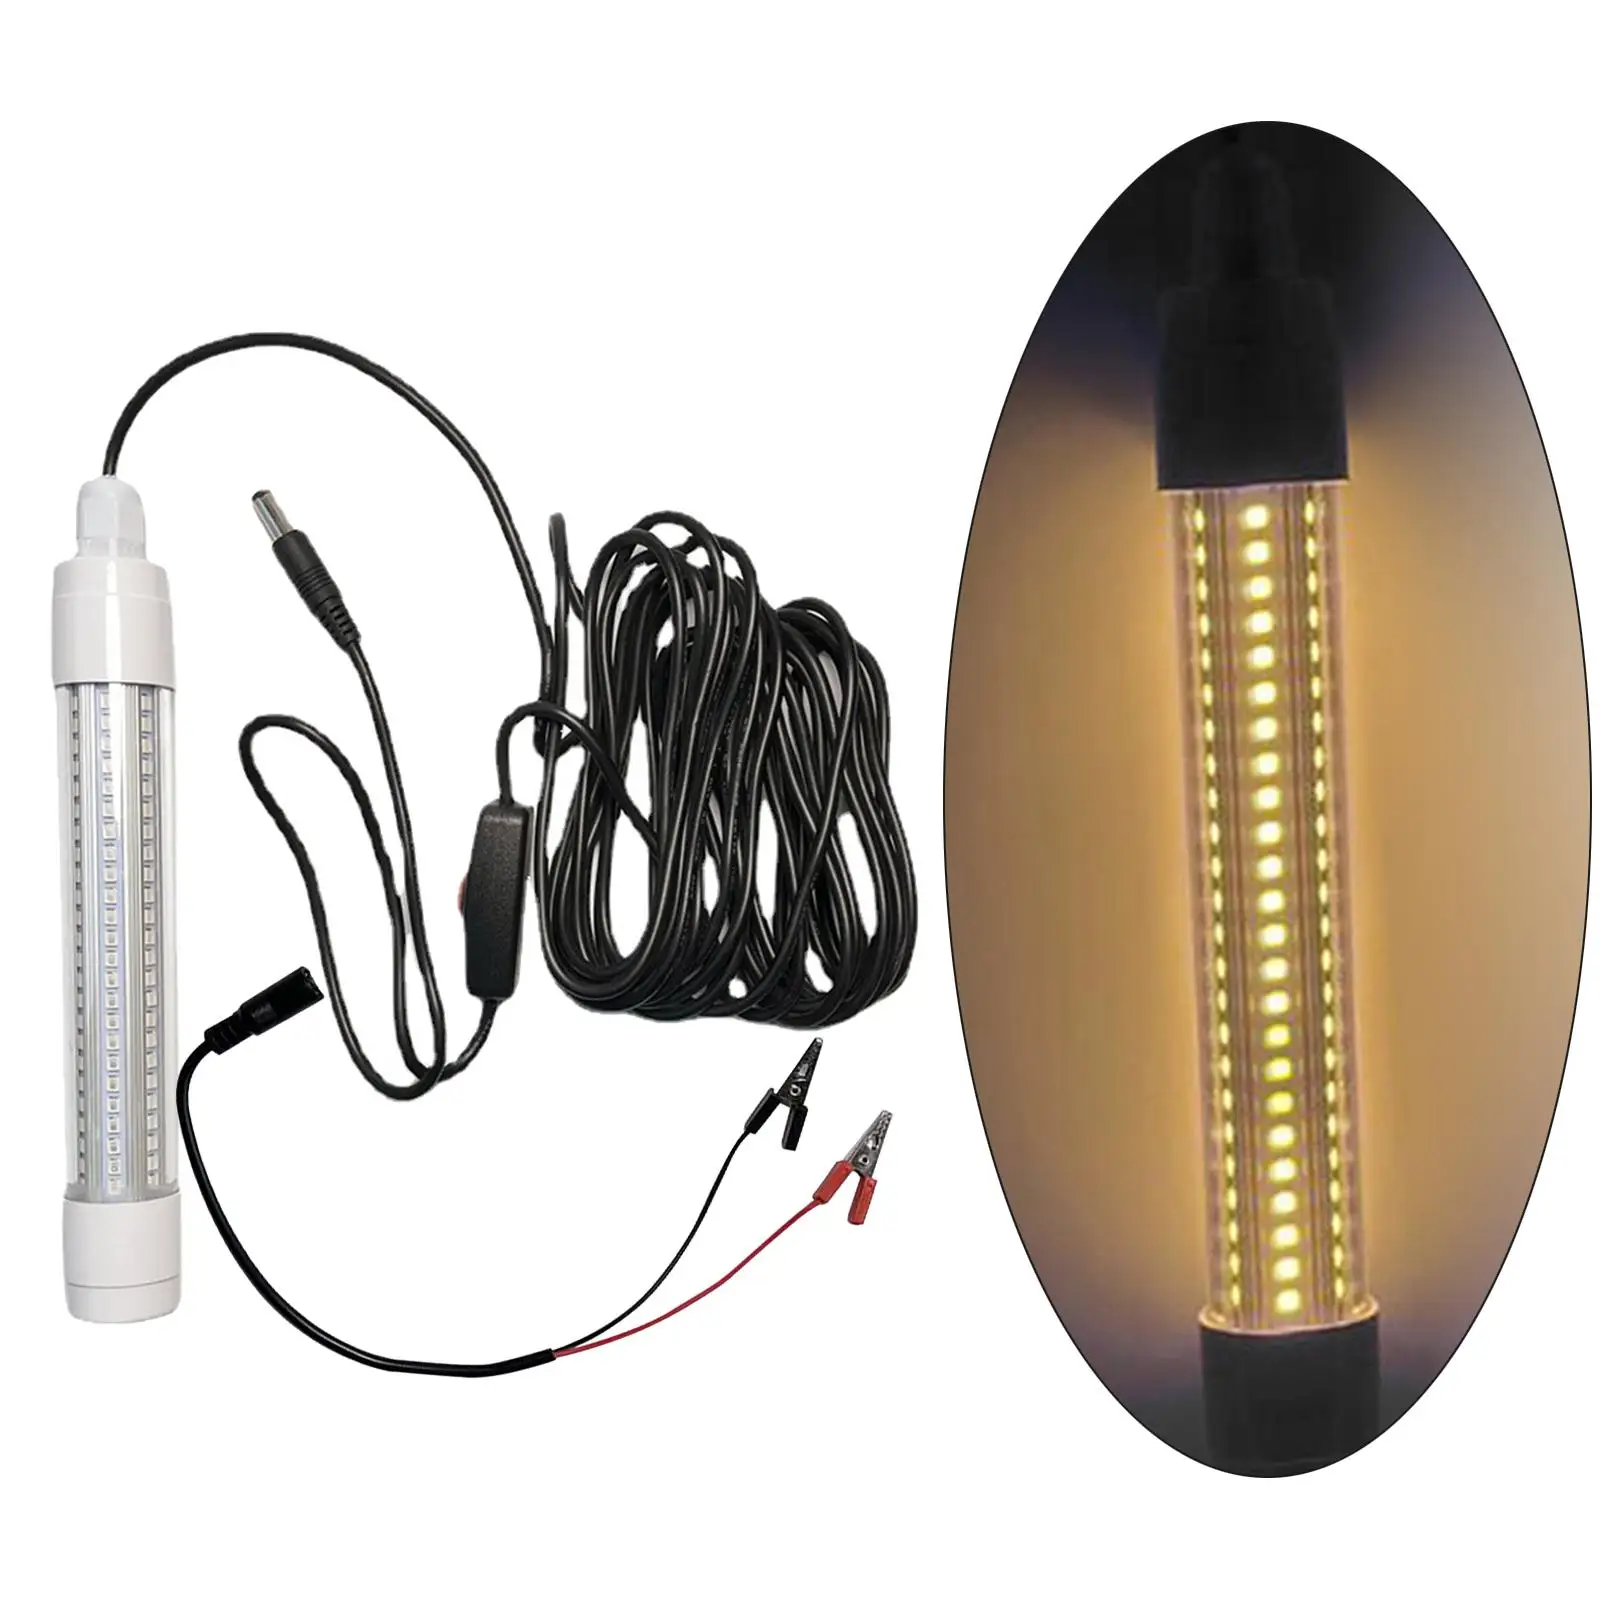 Underwater Underwater Fishing Light Submersible 126 LEDs Finder for Freshwater & Saltwater Squid with Battery Clip &Power Cord